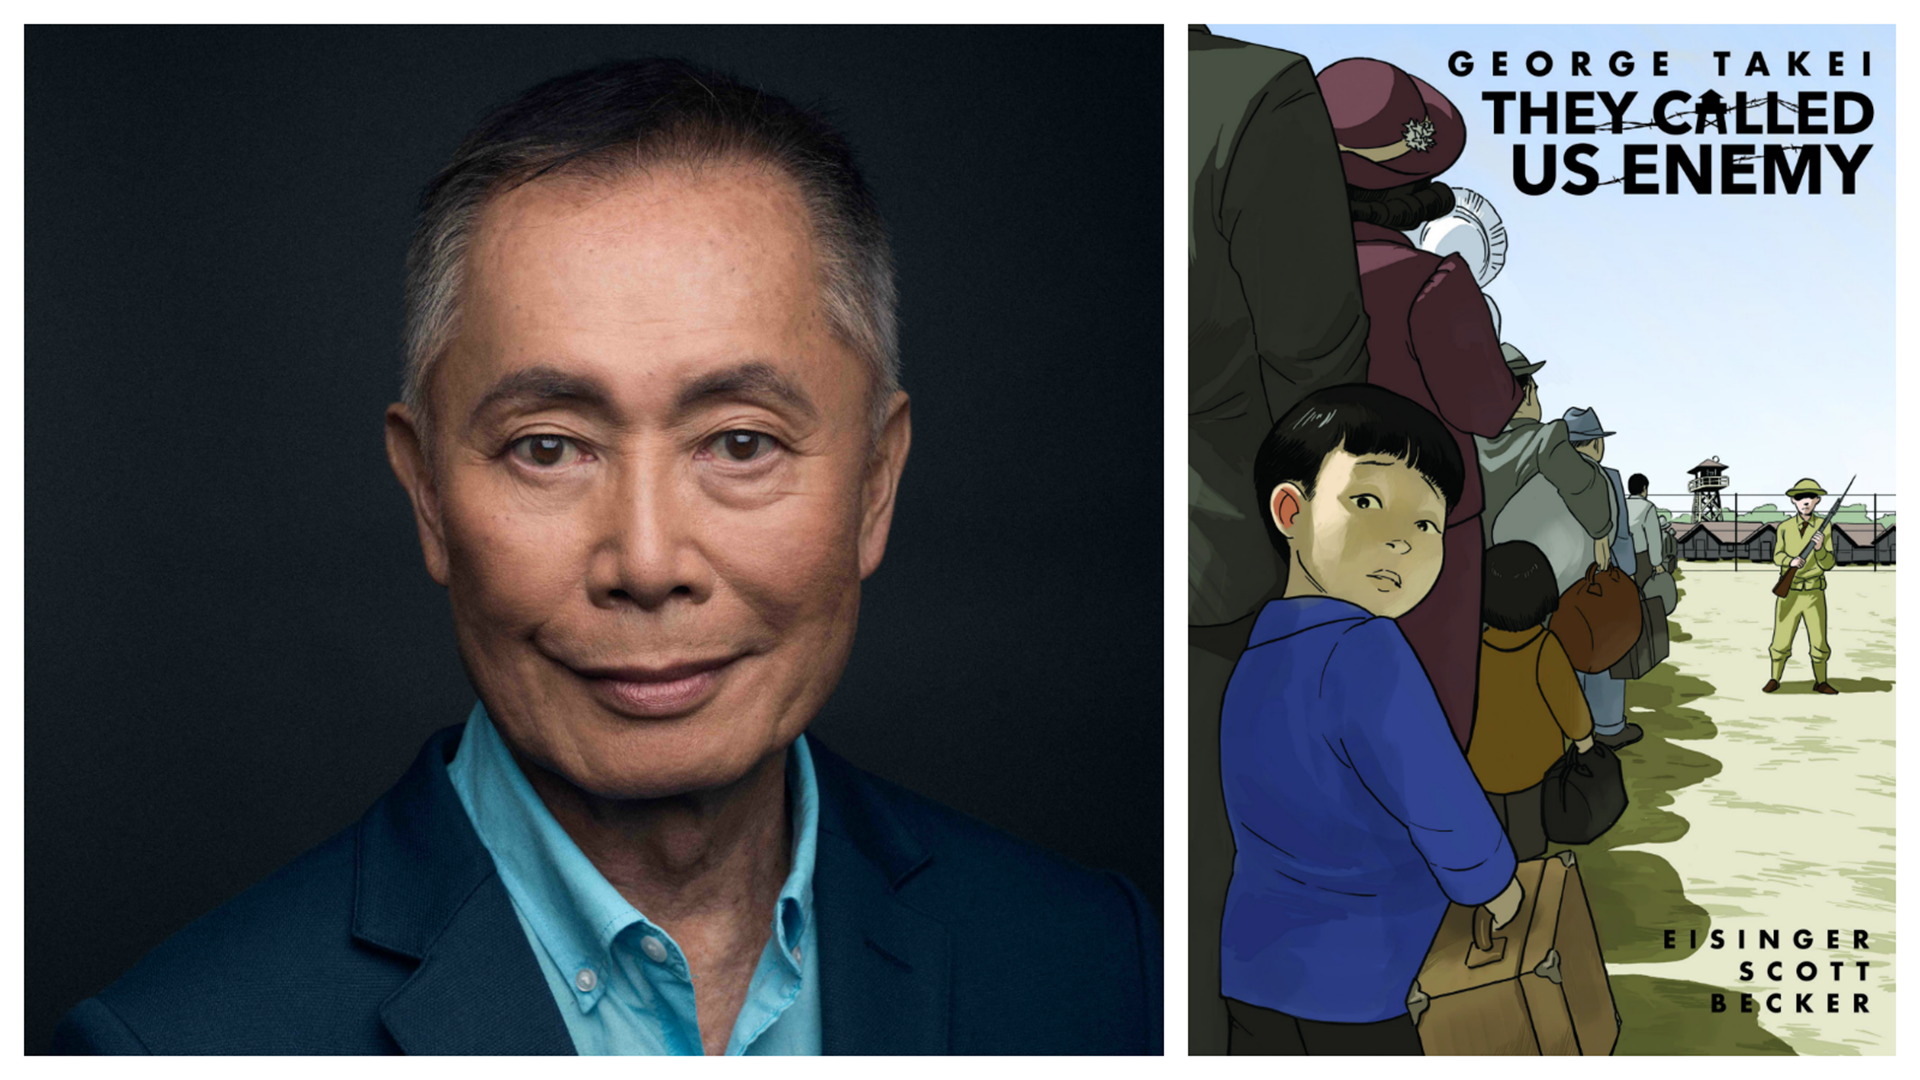 Graphic Novel "They Called Us Enemy" details what George Takei's childhood was like as one of 120,000 Japanese Americans imprisoned by the U.S. Government in WWII.